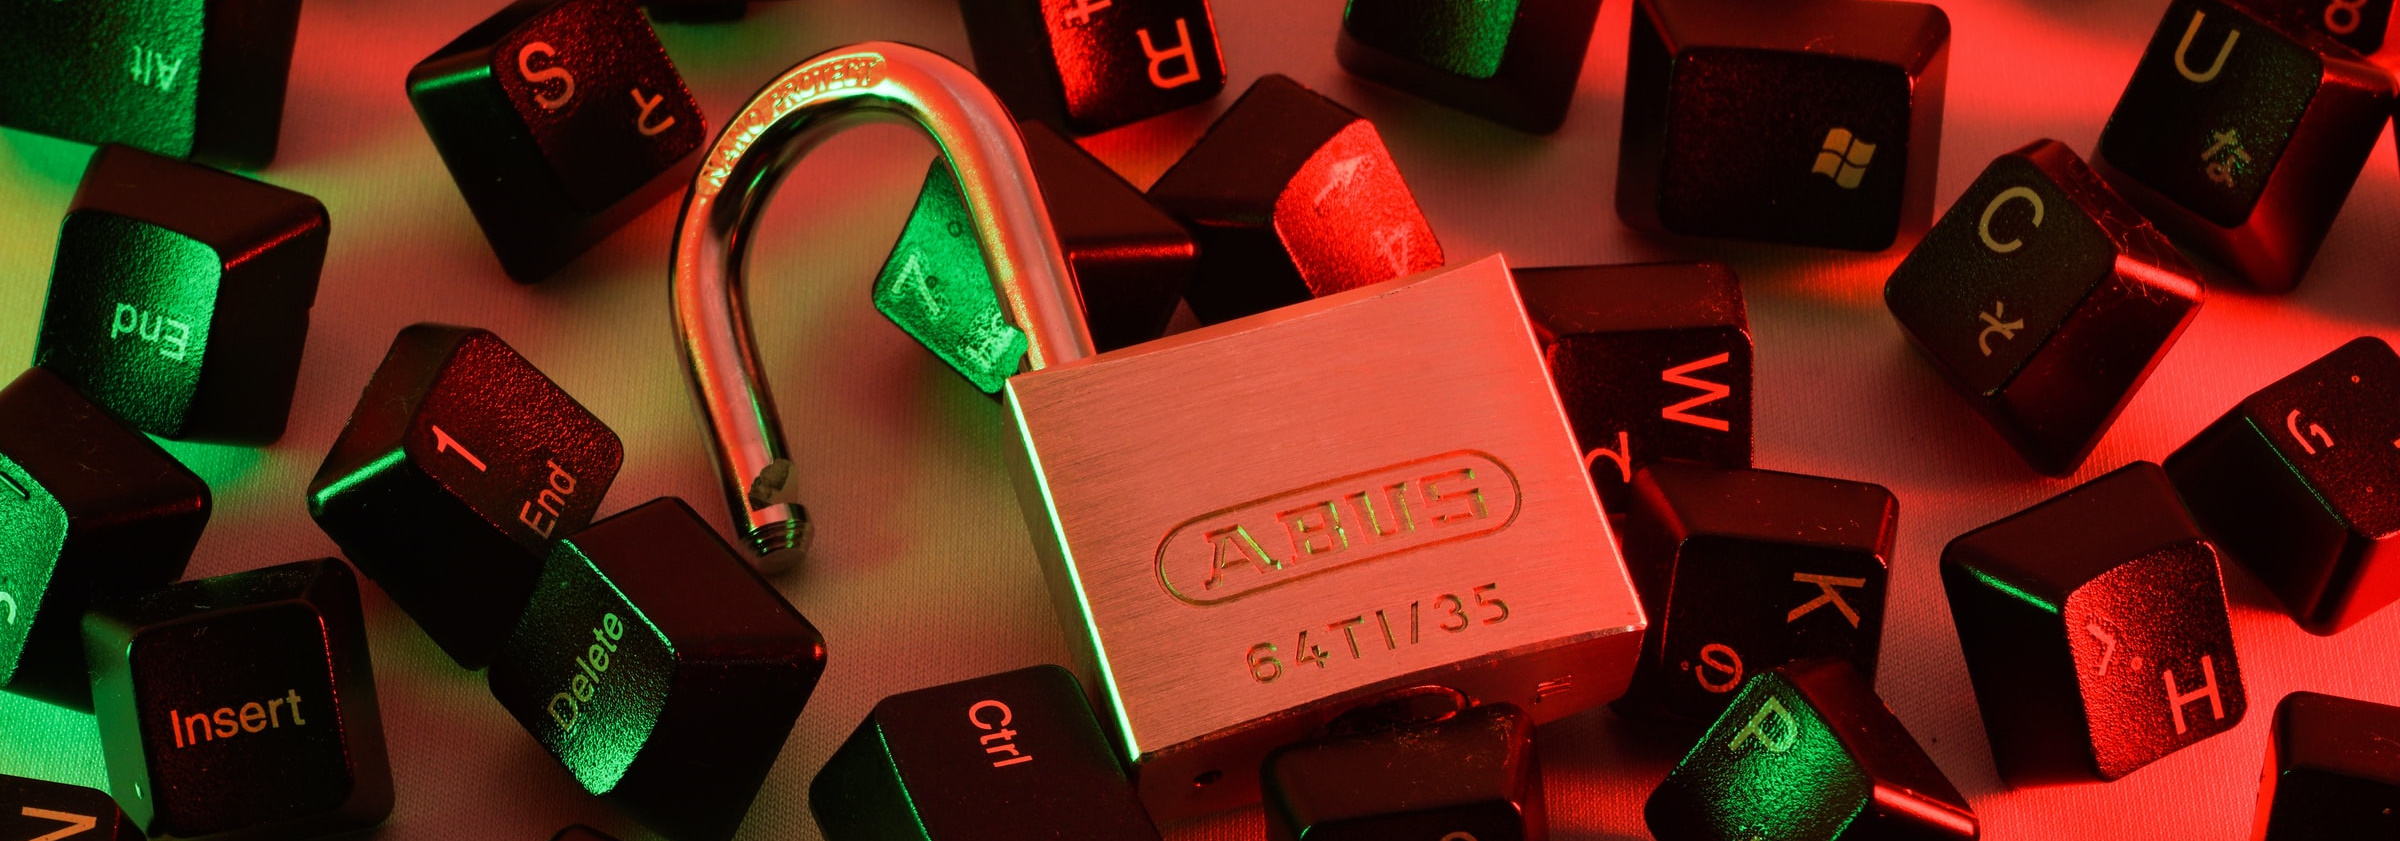 Open lock with various computer keys on a desk